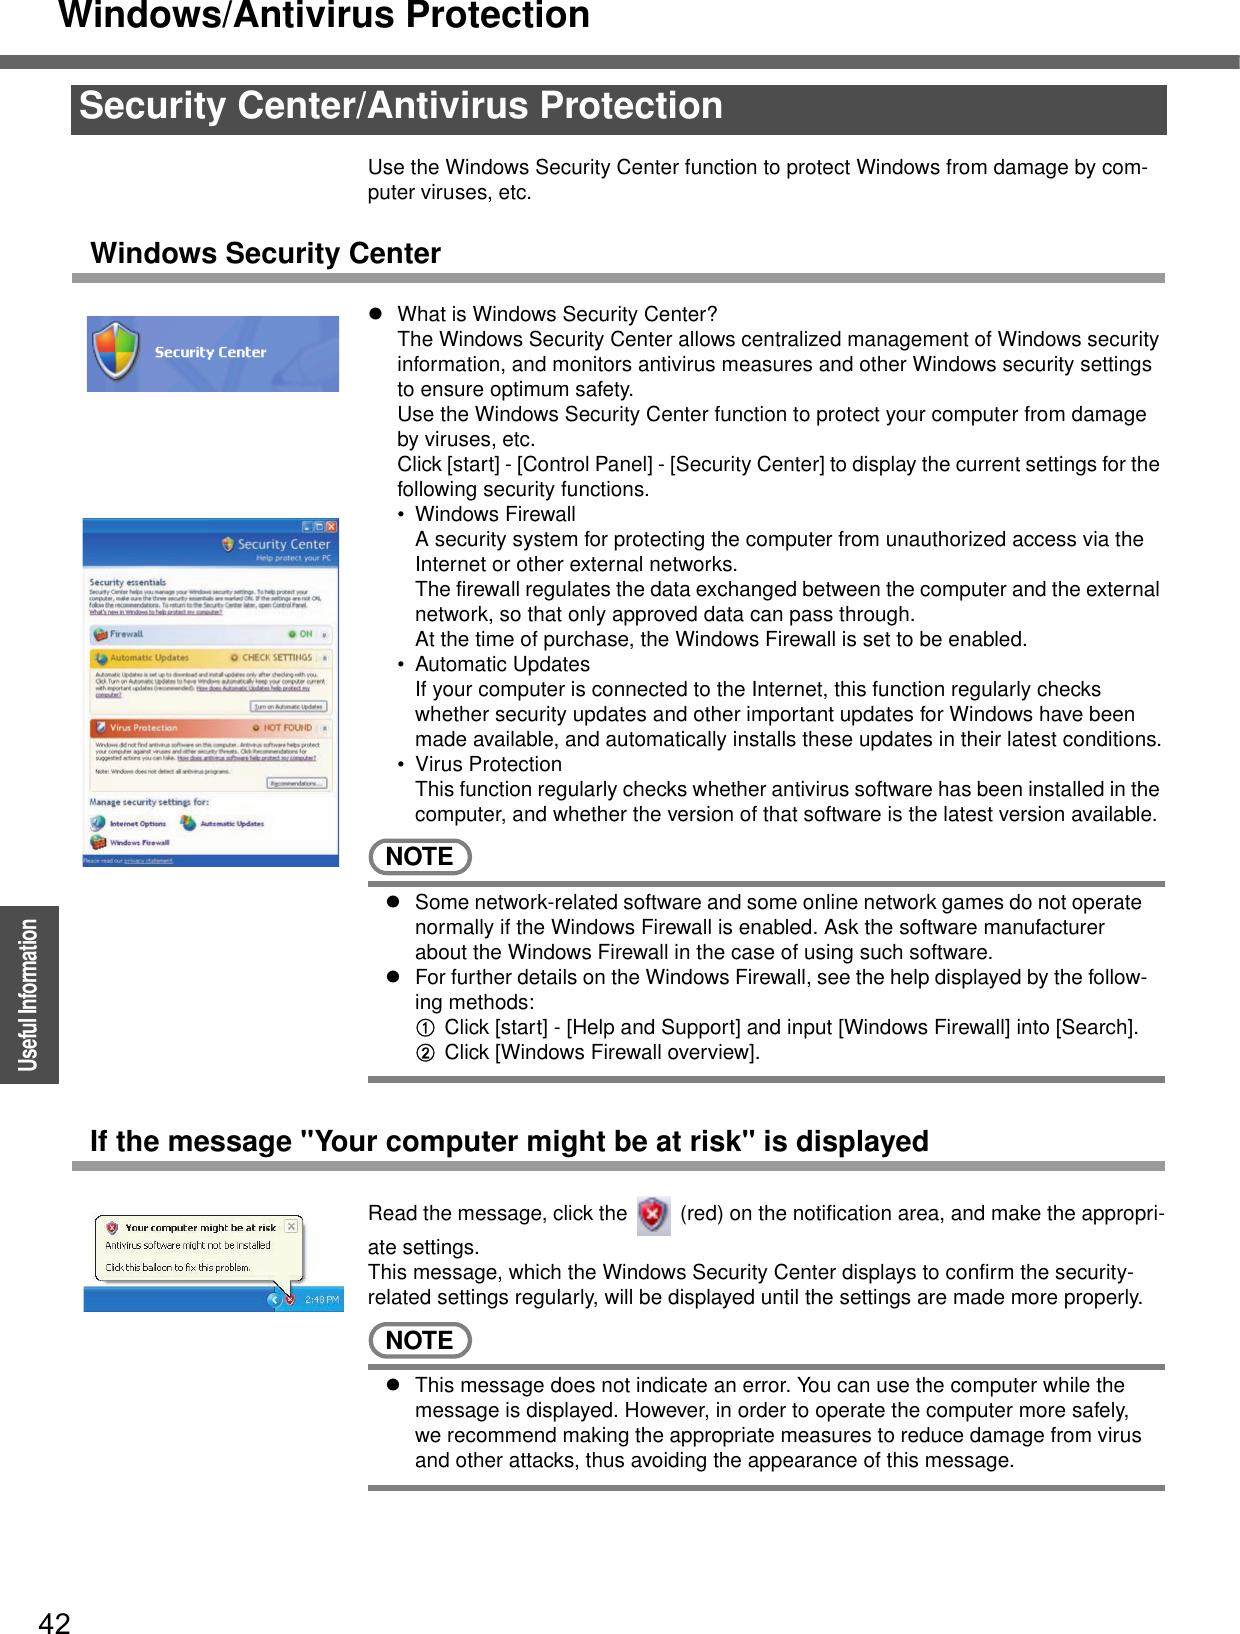 Windows/Antivirus Protection42OperationUseful InformationUse the Windows Security Center function to protect Windows from damage by com-puter viruses, etc.Windows Security CenterzWhat is Windows Security Center?The Windows Security Center allows centralized management of Windows security information, and monitors antivirus measures and other Windows security settings to ensure optimum safety.Use the Windows Security Center function to protect your computer from damage by viruses, etc.Click [start] - [Control Panel] - [Security Center] to display the current settings for the following security functions.• Windows FirewallA security system for protecting the computer from unauthorized access via the Internet or other external networks.The firewall regulates the data exchanged between the computer and the external network, so that only approved data can pass through.At the time of purchase, the Windows Firewall is set to be enabled.• Automatic UpdatesIf your computer is connected to the Internet, this function regularly checks whether security updates and other important updates for Windows have been made available, and automatically installs these updates in their latest conditions.• Virus ProtectionThis function regularly checks whether antivirus software has been installed in the computer, and whether the version of that software is the latest version available.NOTEzSome network-related software and some online network games do not operate normally if the Windows Firewall is enabled. Ask the software manufacturer about the Windows Firewall in the case of using such software.zFor further details on the Windows Firewall, see the help displayed by the follow-ing methods:AClick [start] - [Help and Support] and input [Windows Firewall] into [Search].BClick [Windows Firewall overview].If the message &quot;Your computer might be at risk&quot; is displayedRead the message, click the   (red) on the notification area, and make the appropri-ate settings.This message, which the Windows Security Center displays to confirm the security-related settings regularly, will be displayed until the settings are made more properly.NOTEzThis message does not indicate an error. You can use the computer while the message is displayed. However, in order to operate the computer more safely, we recommend making the appropriate measures to reduce damage from virus and other attacks, thus avoiding the appearance of this message.Security Center/Antivirus Protection